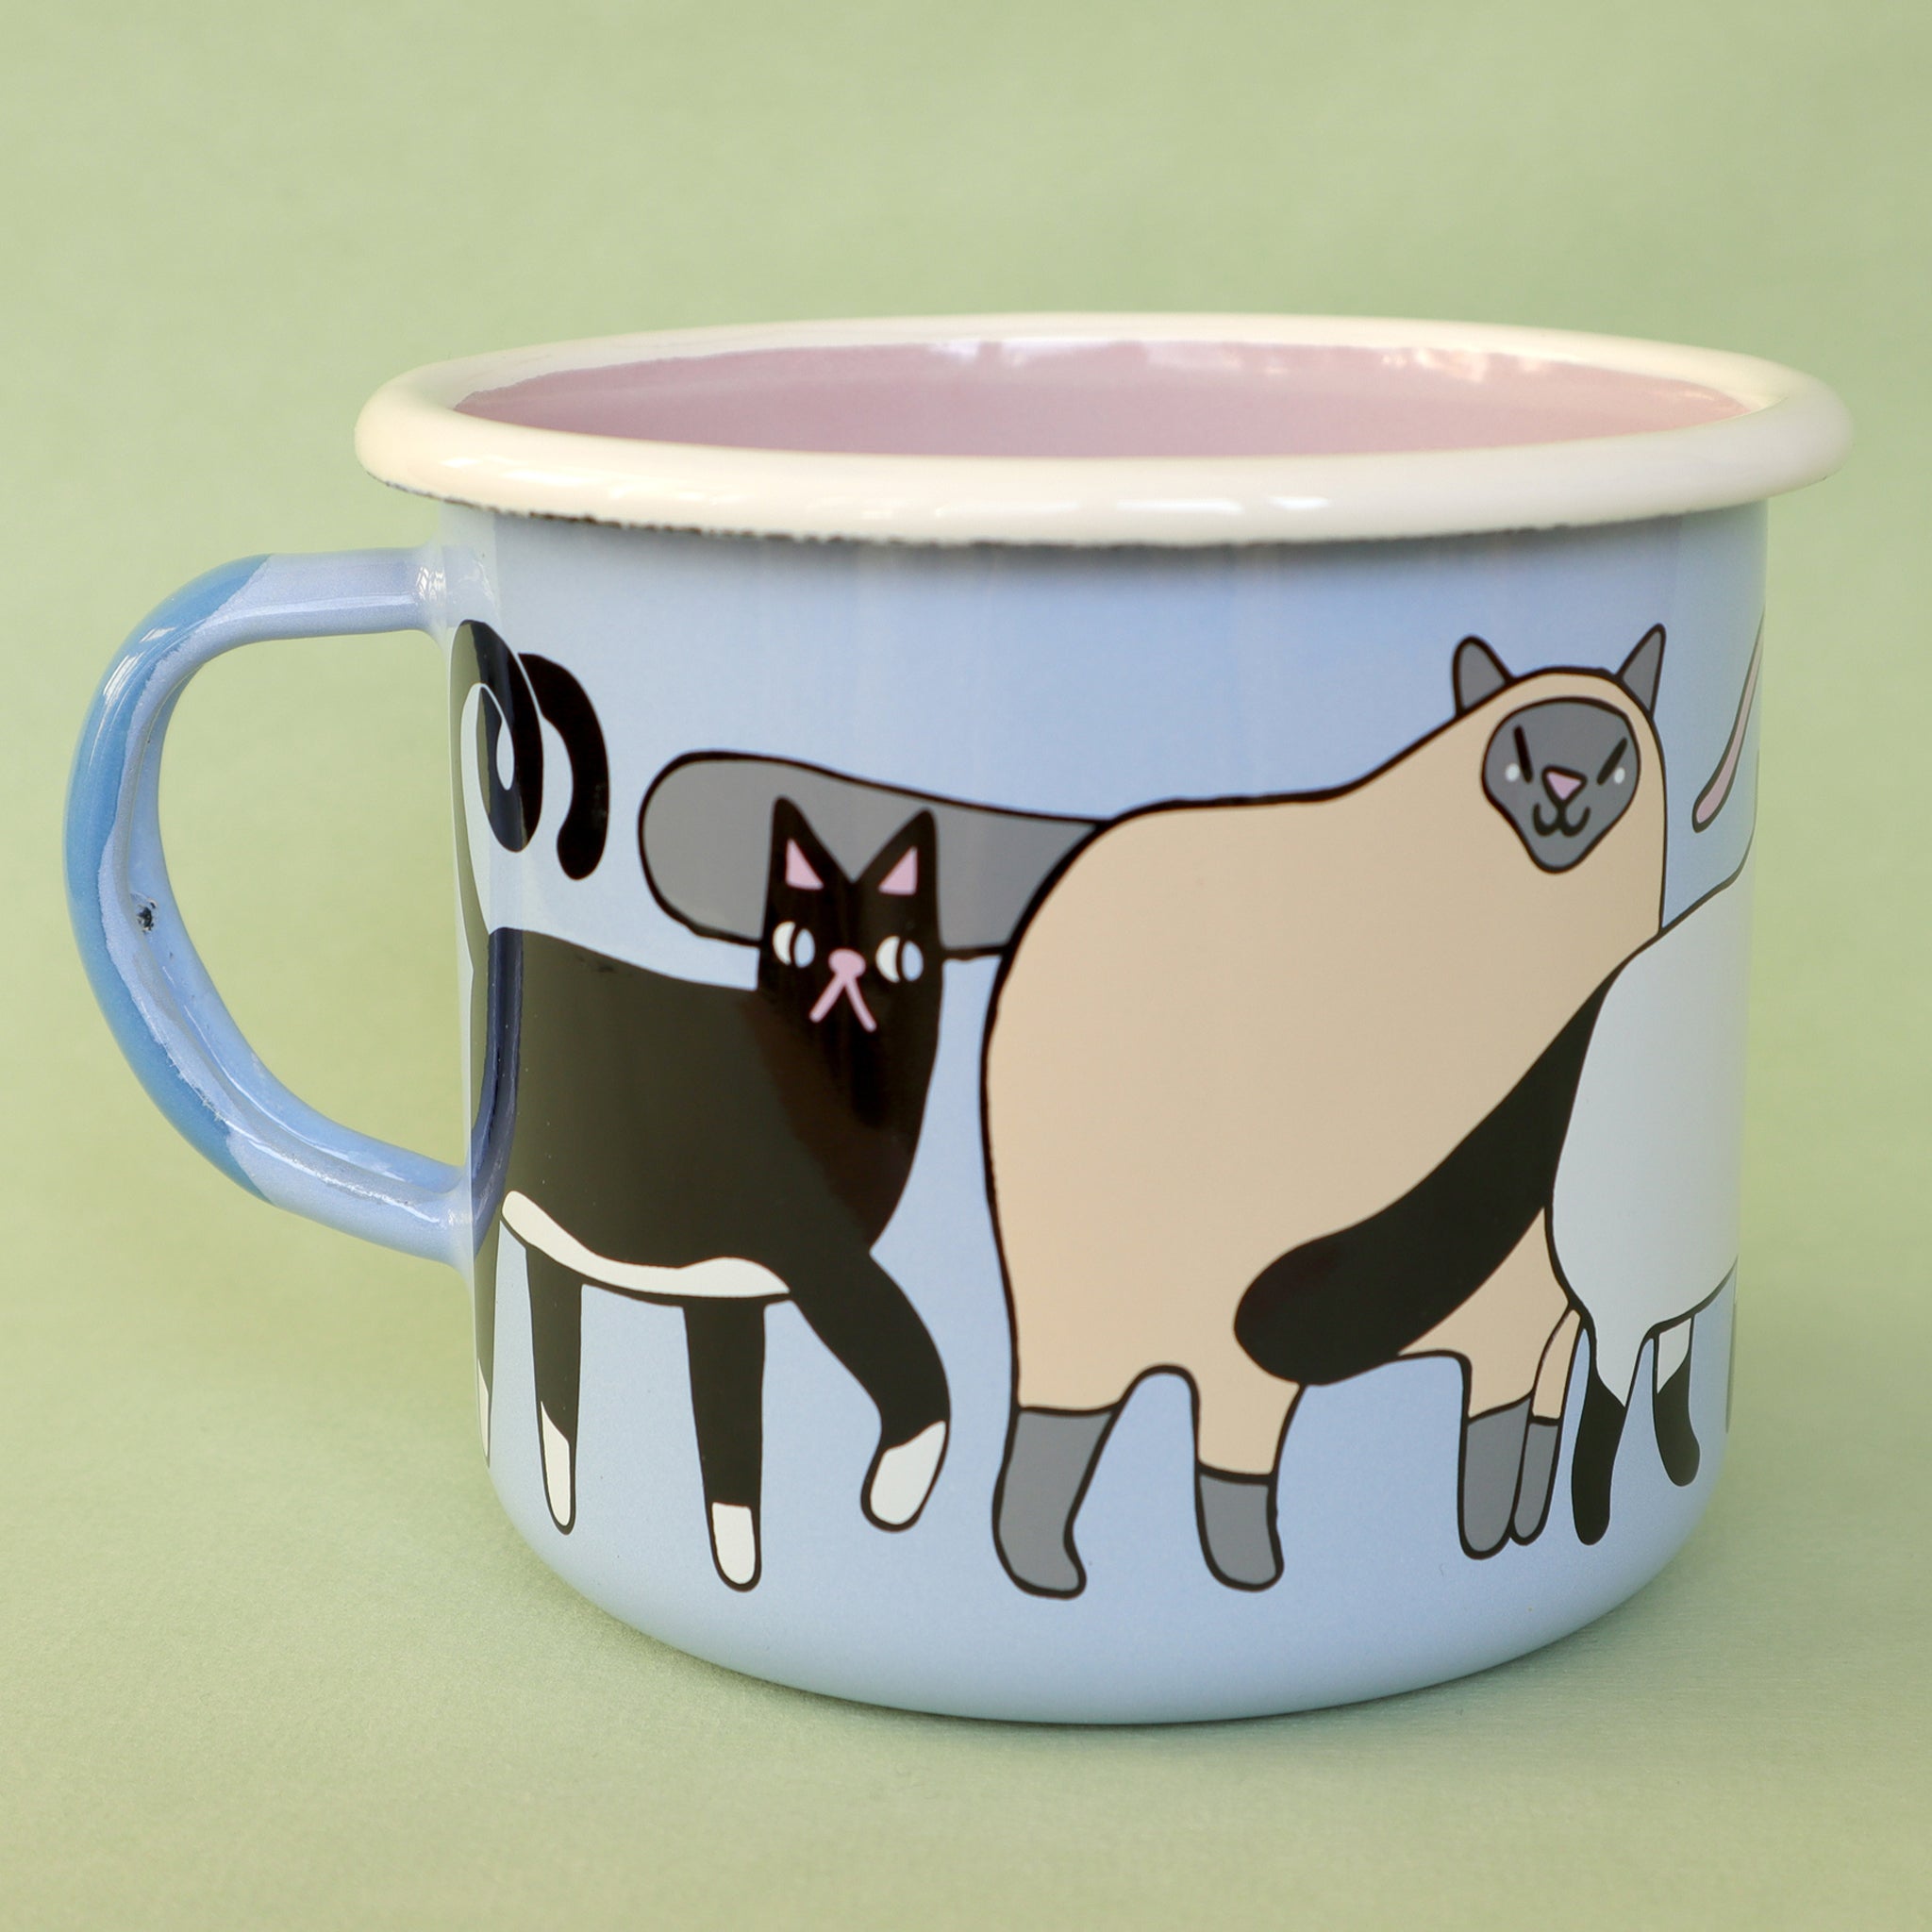 Light Blue, Pink, Cream and Grey Enamel Cats Design Mug by Illustrator Eva Stalinski Featuring Sacred Birman, European British Shorthair, Kitten and Hairless Sphynx Cats, 2021. Produced by Family Owned Polish Factory Emalco Enamelware